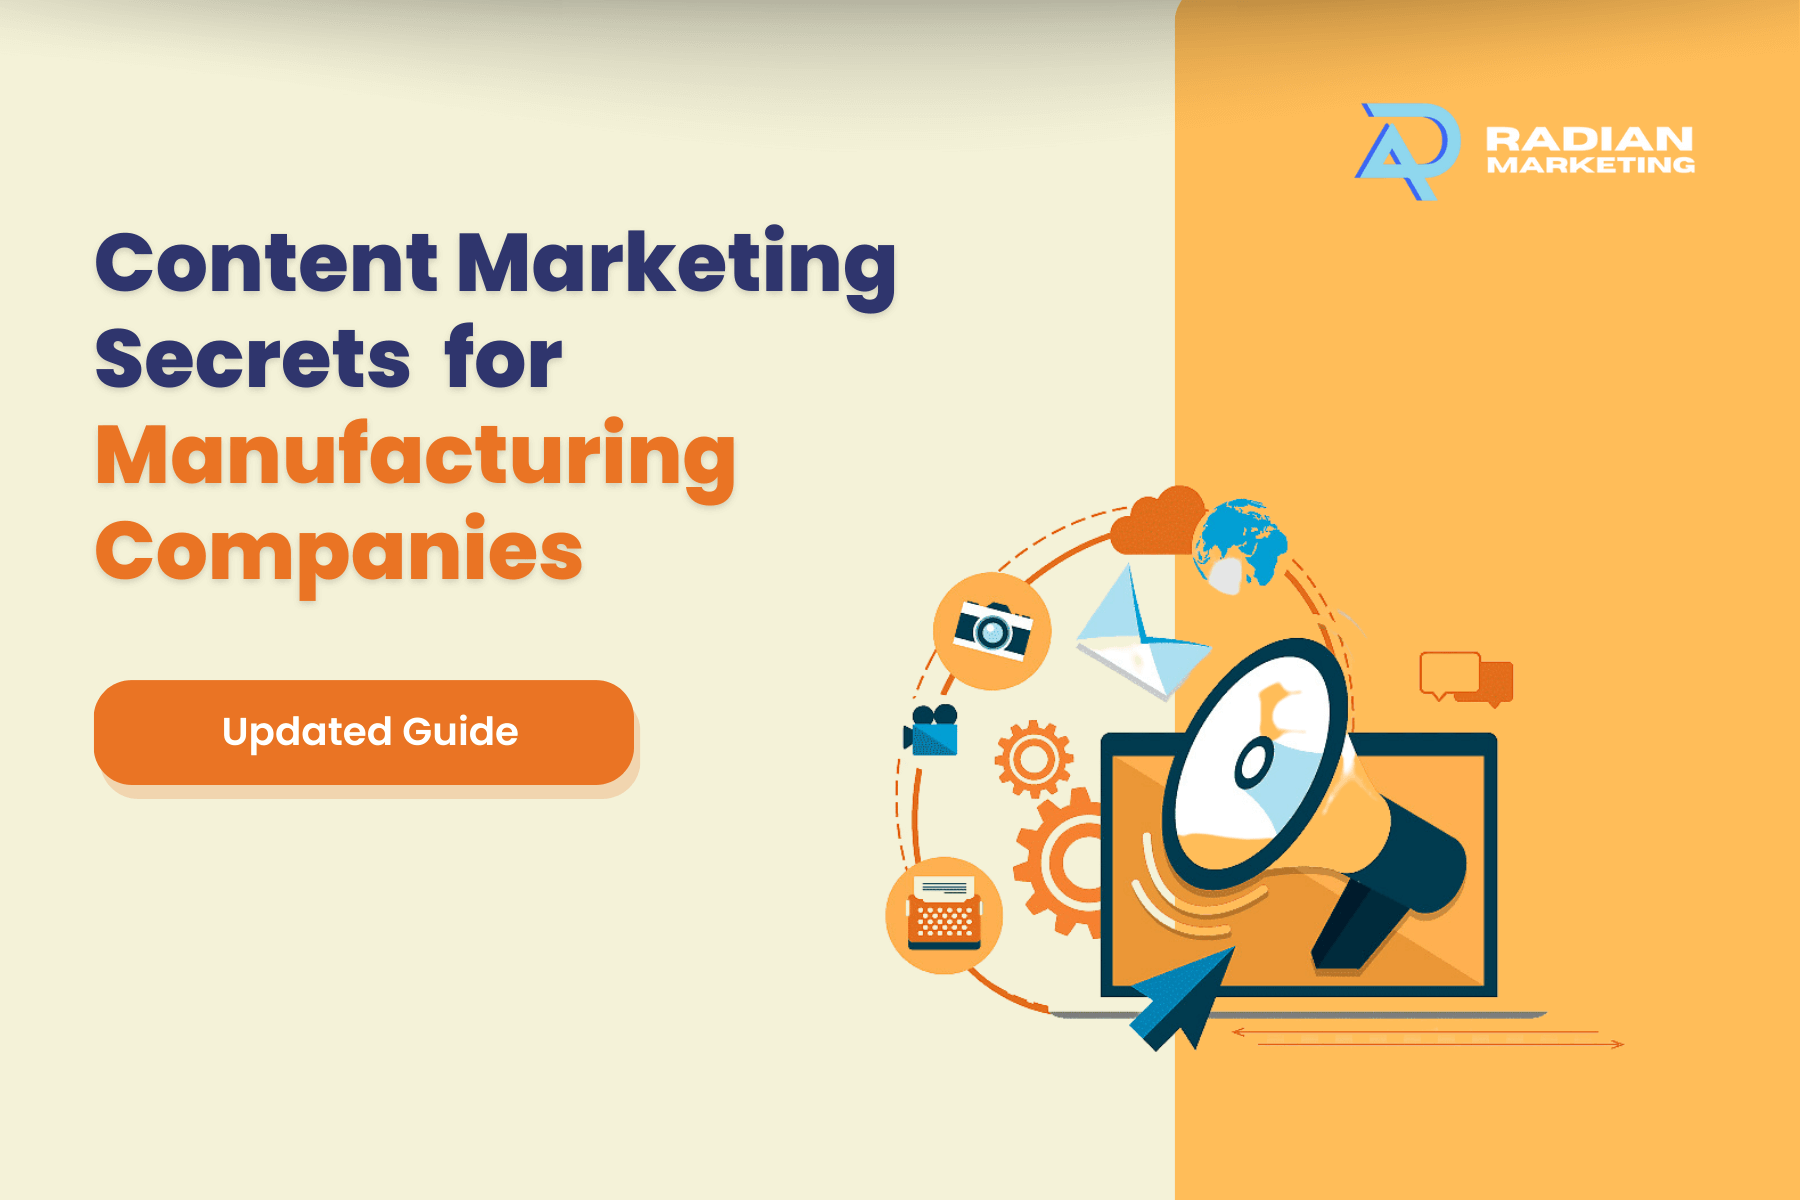 Content Marketing Secrets for Manufacturing Companies